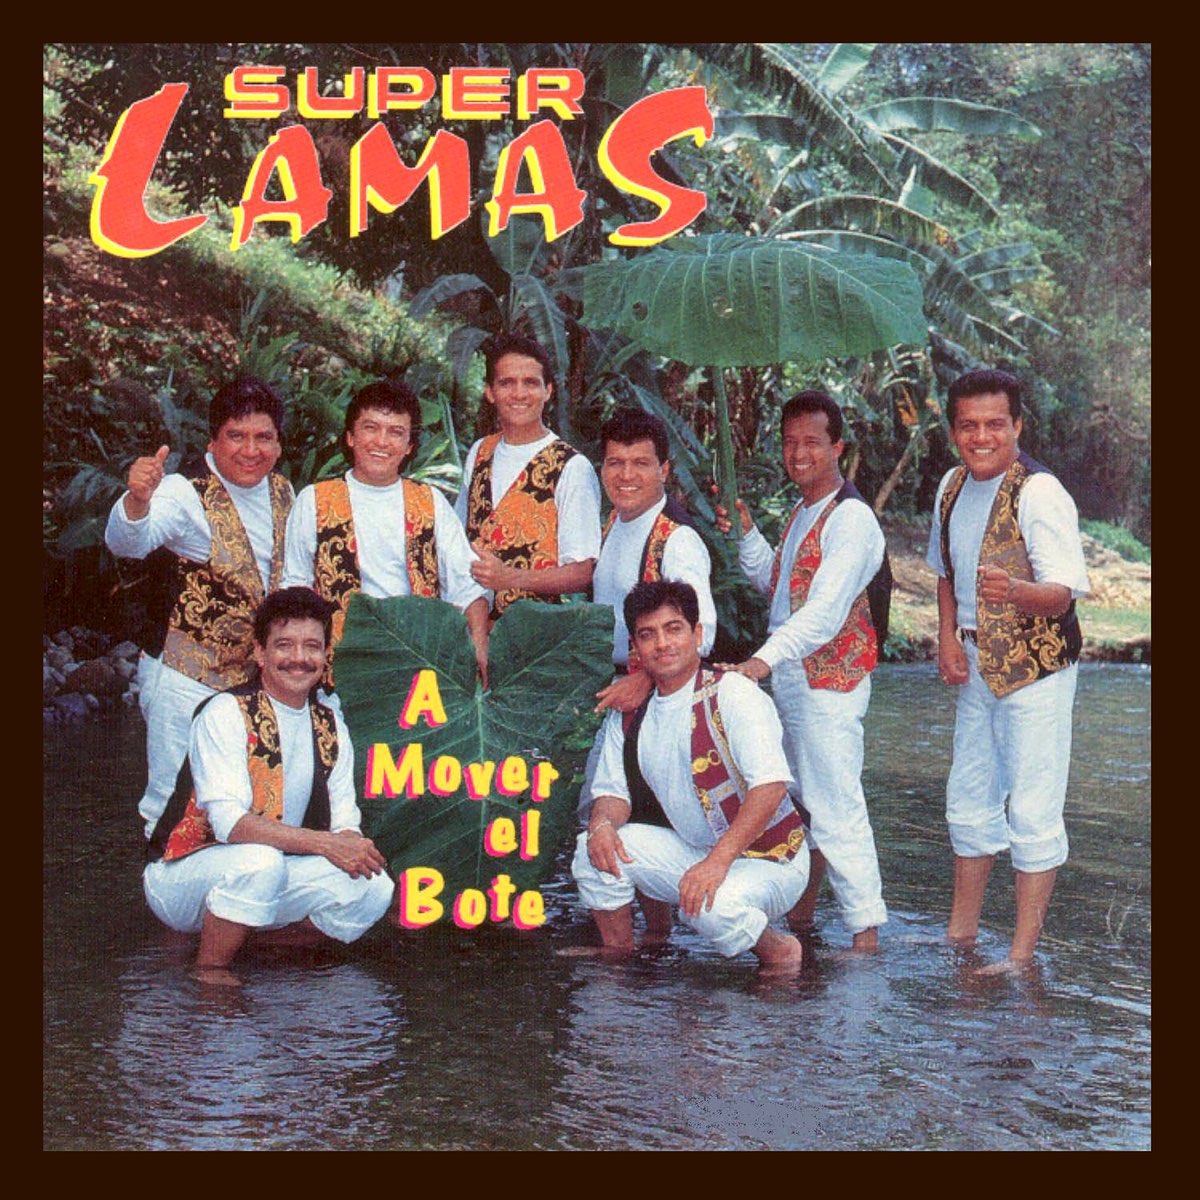 A Mover El Bote by Super Lamas on Apple Music